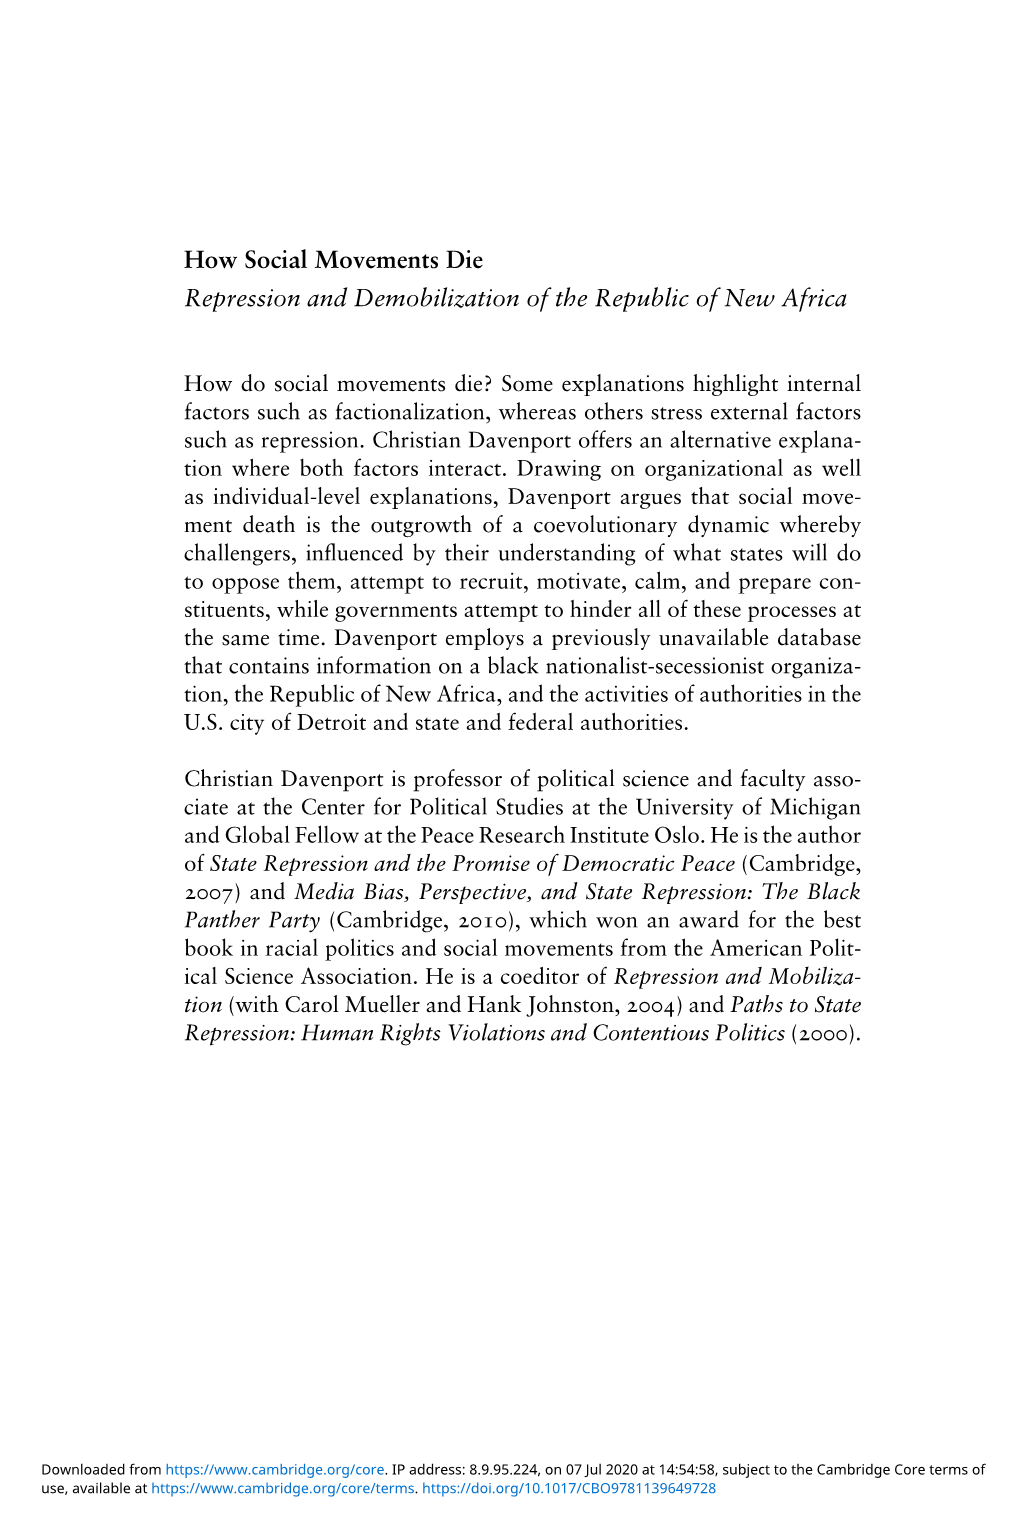 How Social Movements Die Repression and Demobilization of the Republic of New Africa